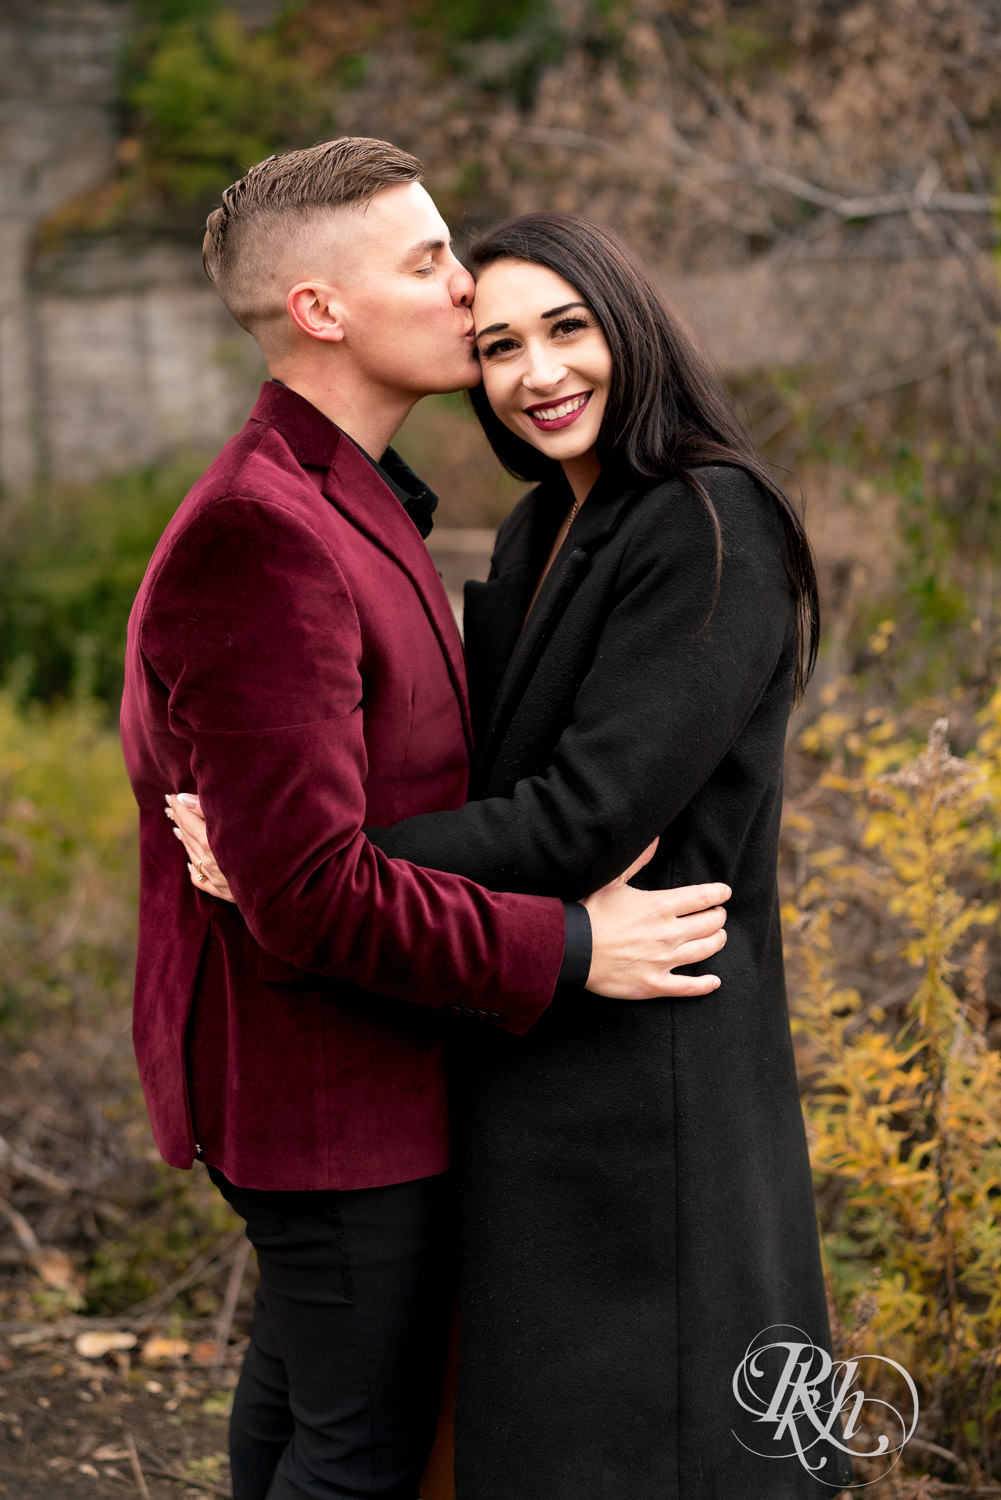 Man in black clothes and burgundy jacket and woman in black dress snuggle and smile on a trail in Minneapolis, Minnesota surrounded by fall colors.